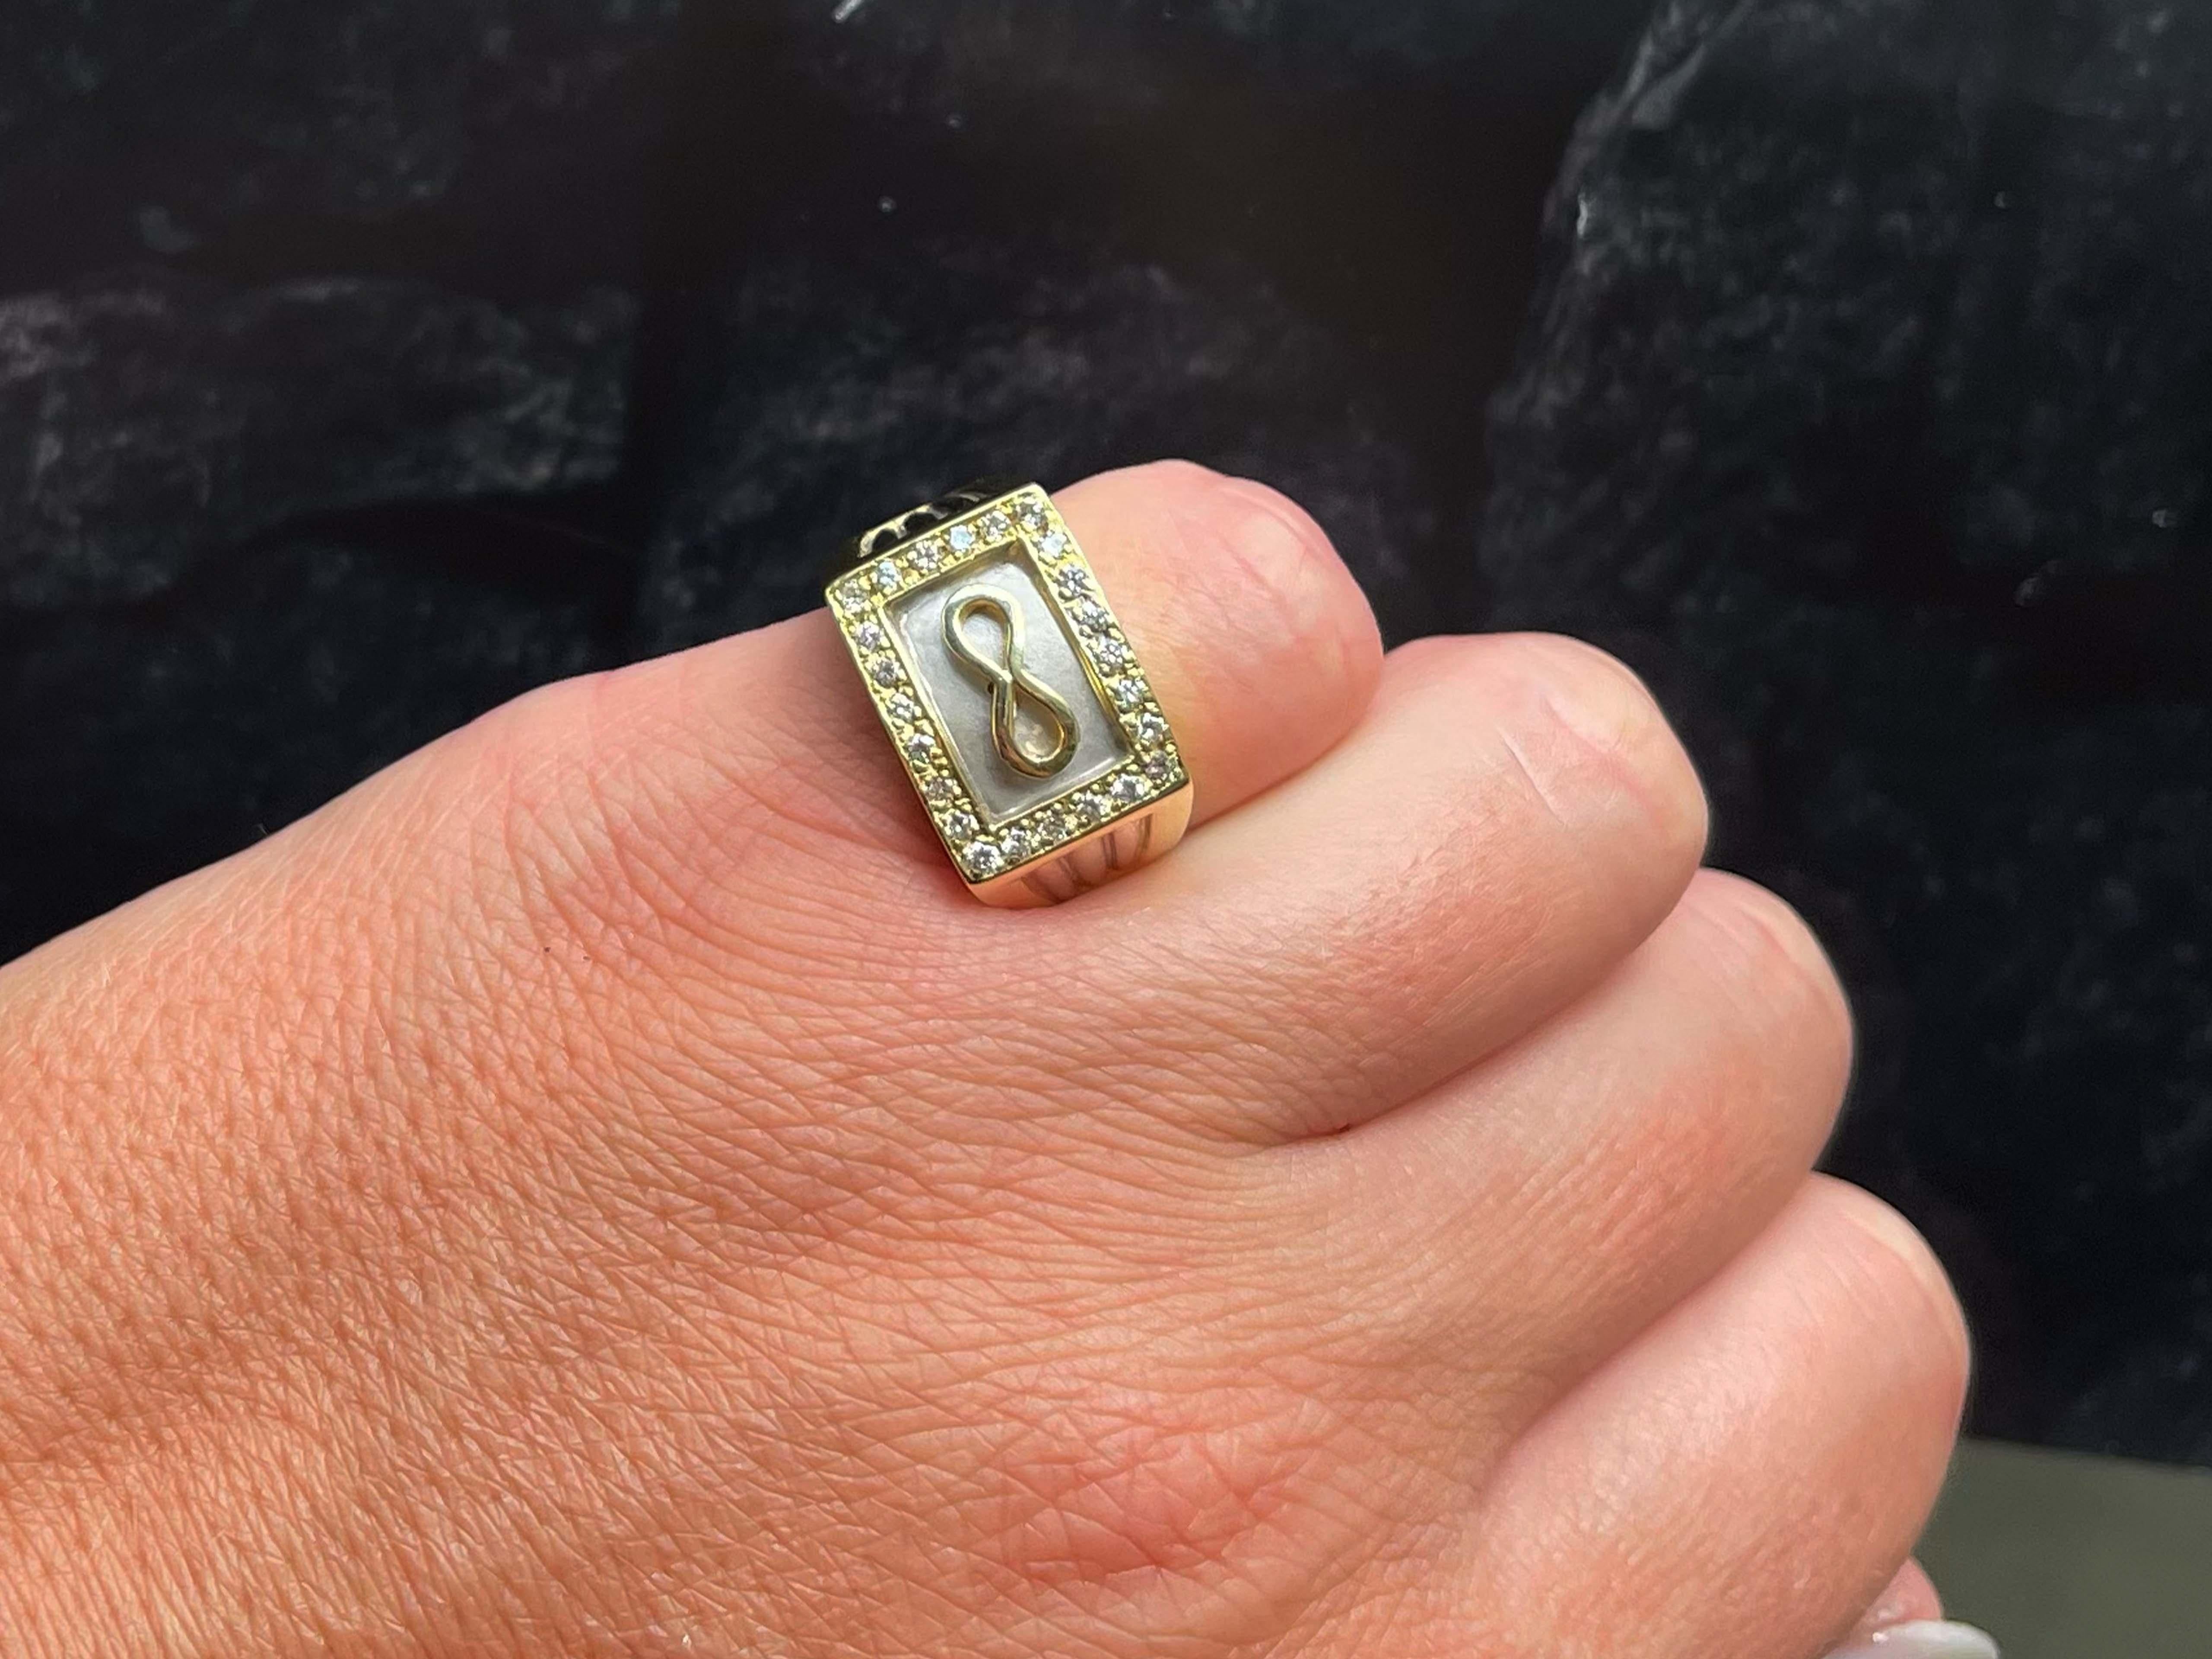 Item Specifications:

Metal: 18K Yellow Gold

Style: Statement Ring

Ring Size: 7 (resizing available for a fee)

Ring Height: 12.5 mm 

Total Weight: 12.6 Grams

Diamond Count: 24

Diamond Carat Weight: 0.25

Diamond Color: G-H

Diamond Clarity: